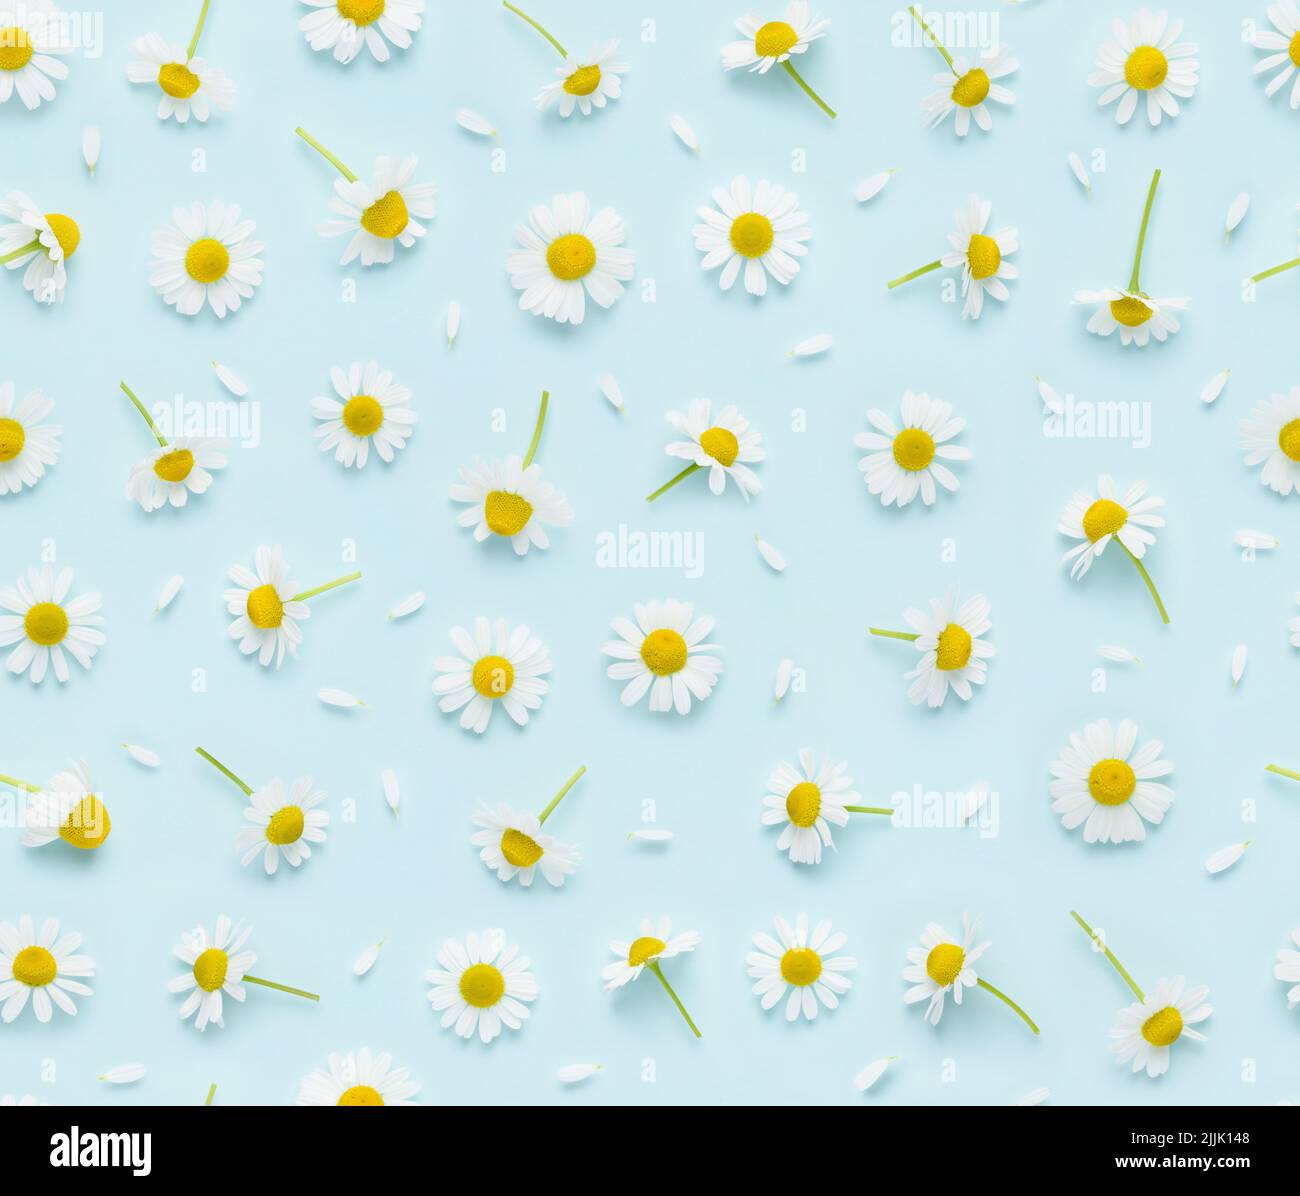 Seamless floral pattern of chamomile flowers and petals on blue background top view flat lay Stock Photo